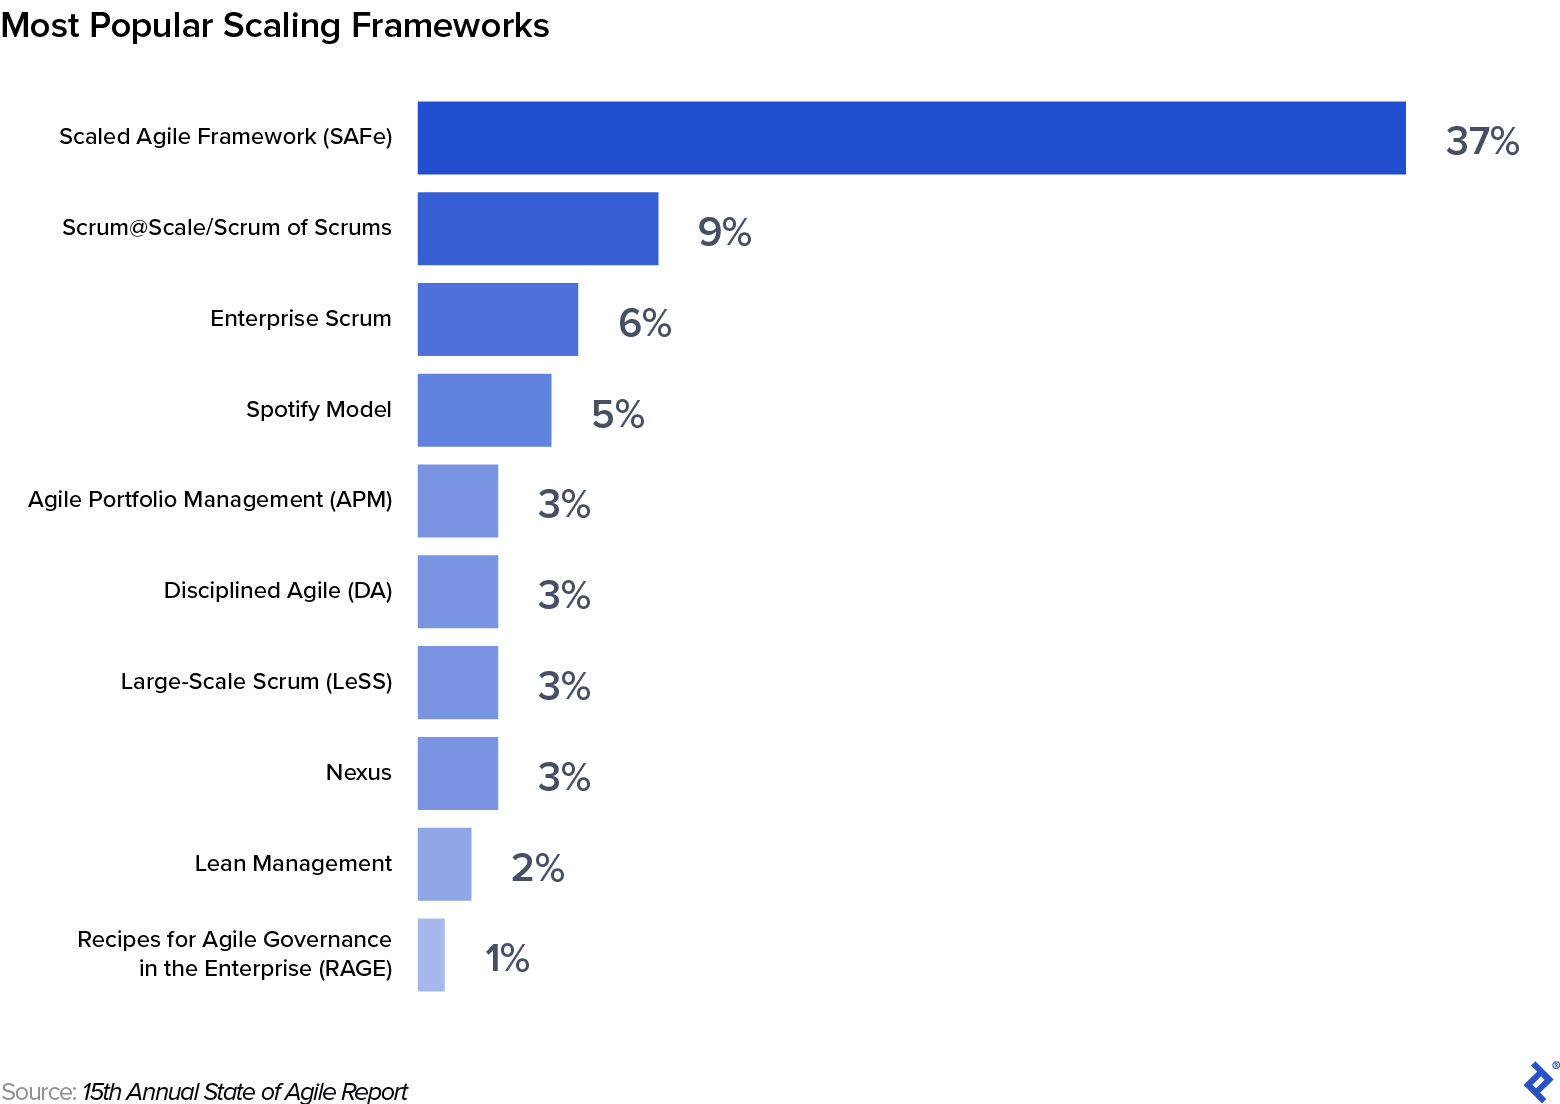 A bar graph titled "Most Popular Scaling Frameworks." There are 10 bars, labeled "Scaled Agile Framework (SAFe)," "Scrum@Scale/Scrum of Scrums," "Enterprise Scrum," "Spotify Model," "Agile Portfolio Management (APM)," "Disciplined Agile (DA)," "Large-Scale Scrum (LeSS)," "Nexus," "Lean Management," and "Recipes for Agile Governance in the Enterprise (RAGE)." Each bar is also labeled with percentages representing the proportion of organizations using that framework: 37%, 9%, 6%, 5%, 3%, 3%, 3%, 3%, 2%, and 1%, respectively. A line at the bottom of the graph says, "Source: 15th Annual State of Agile Report."